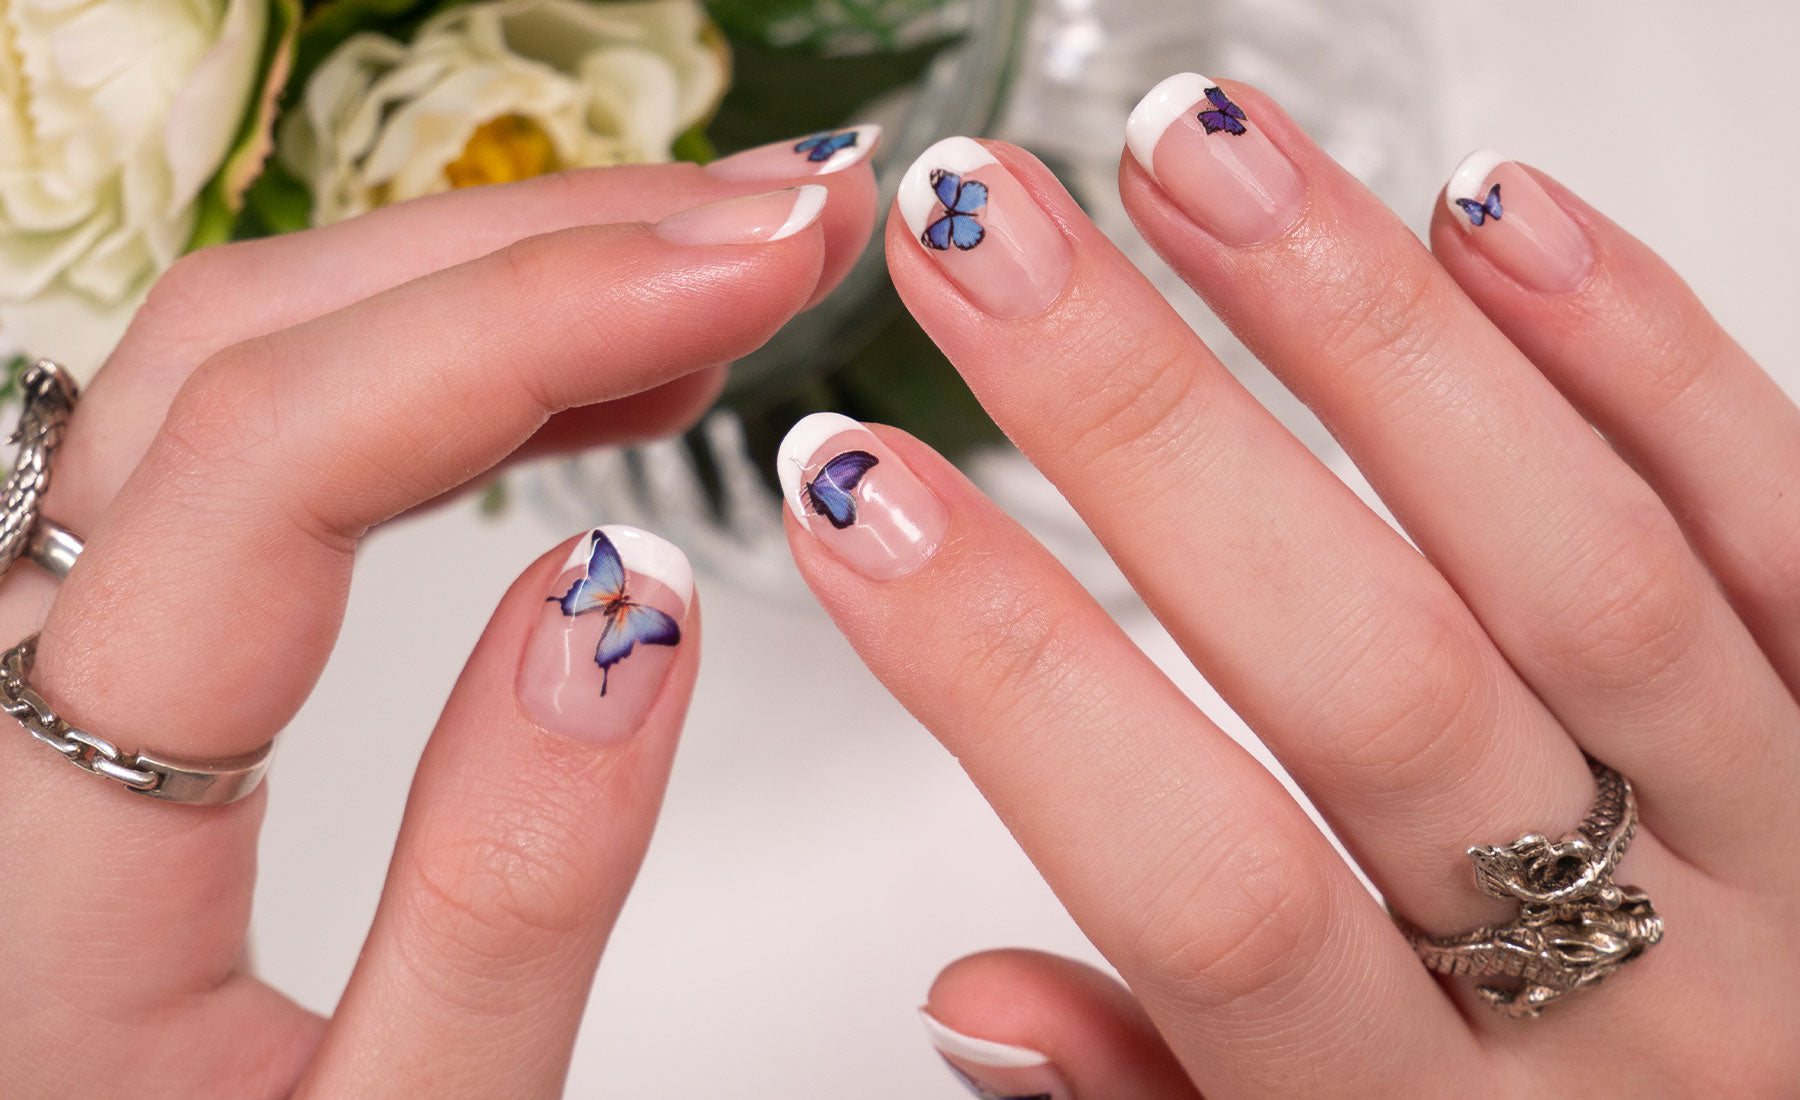 Gelous Butterfly Sticker & French Tip gel nail art - photographed in Australia on model